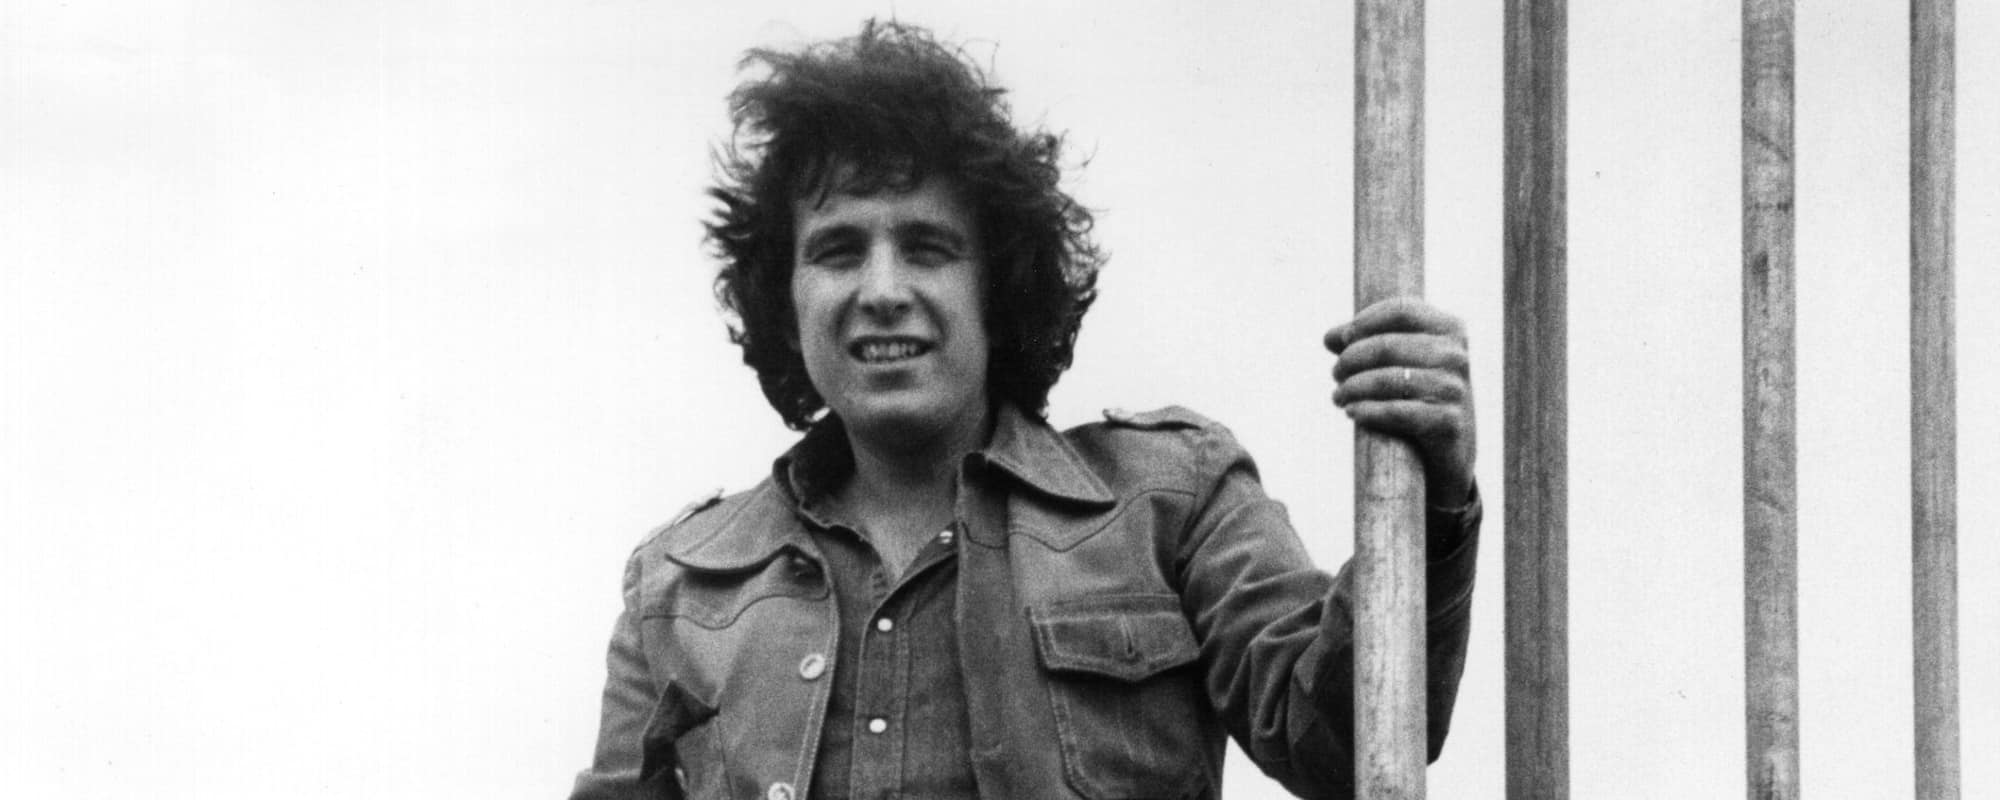 Behind The Song: “American Pie” by Don McLean